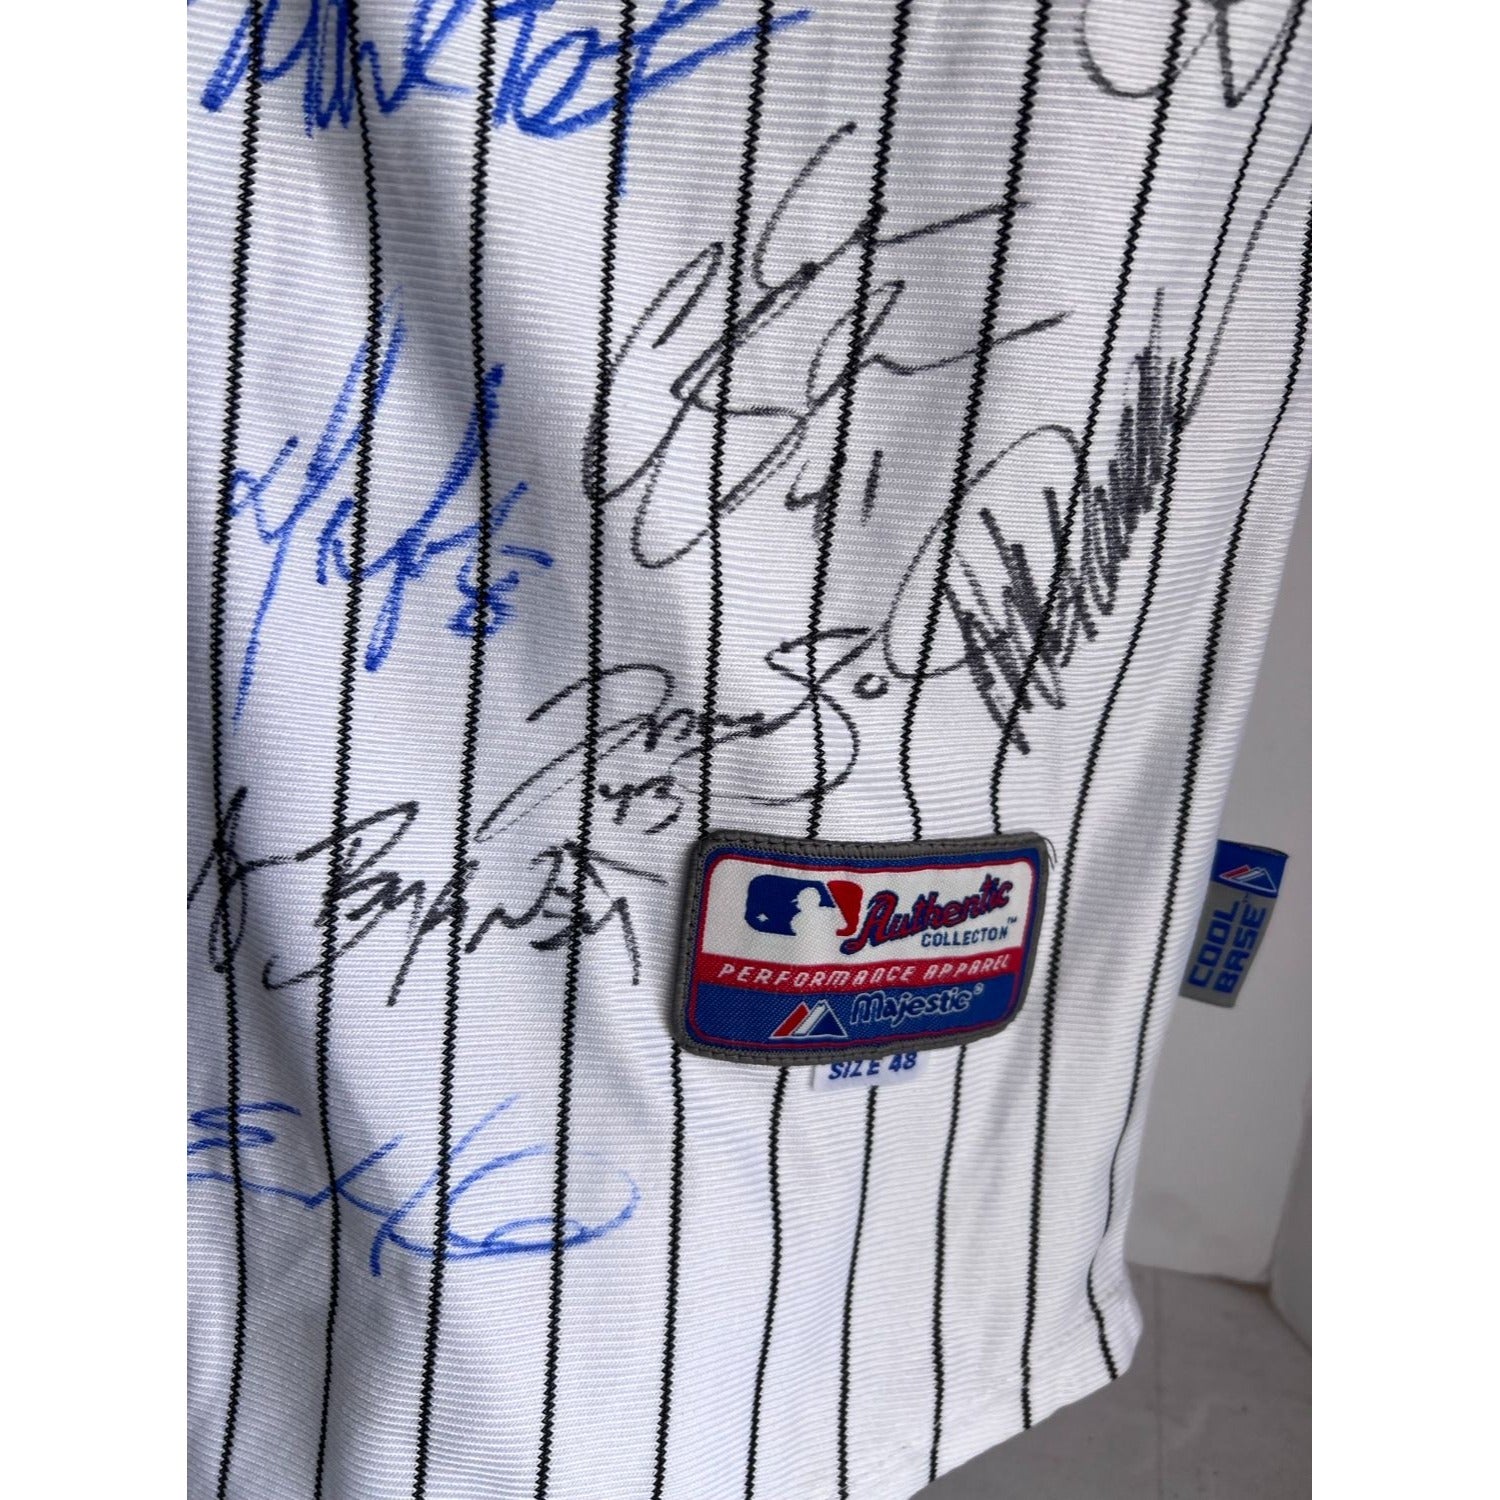 New York Yankees Derek Jeter Jersey Majestic 2009 World Series team signed with proof